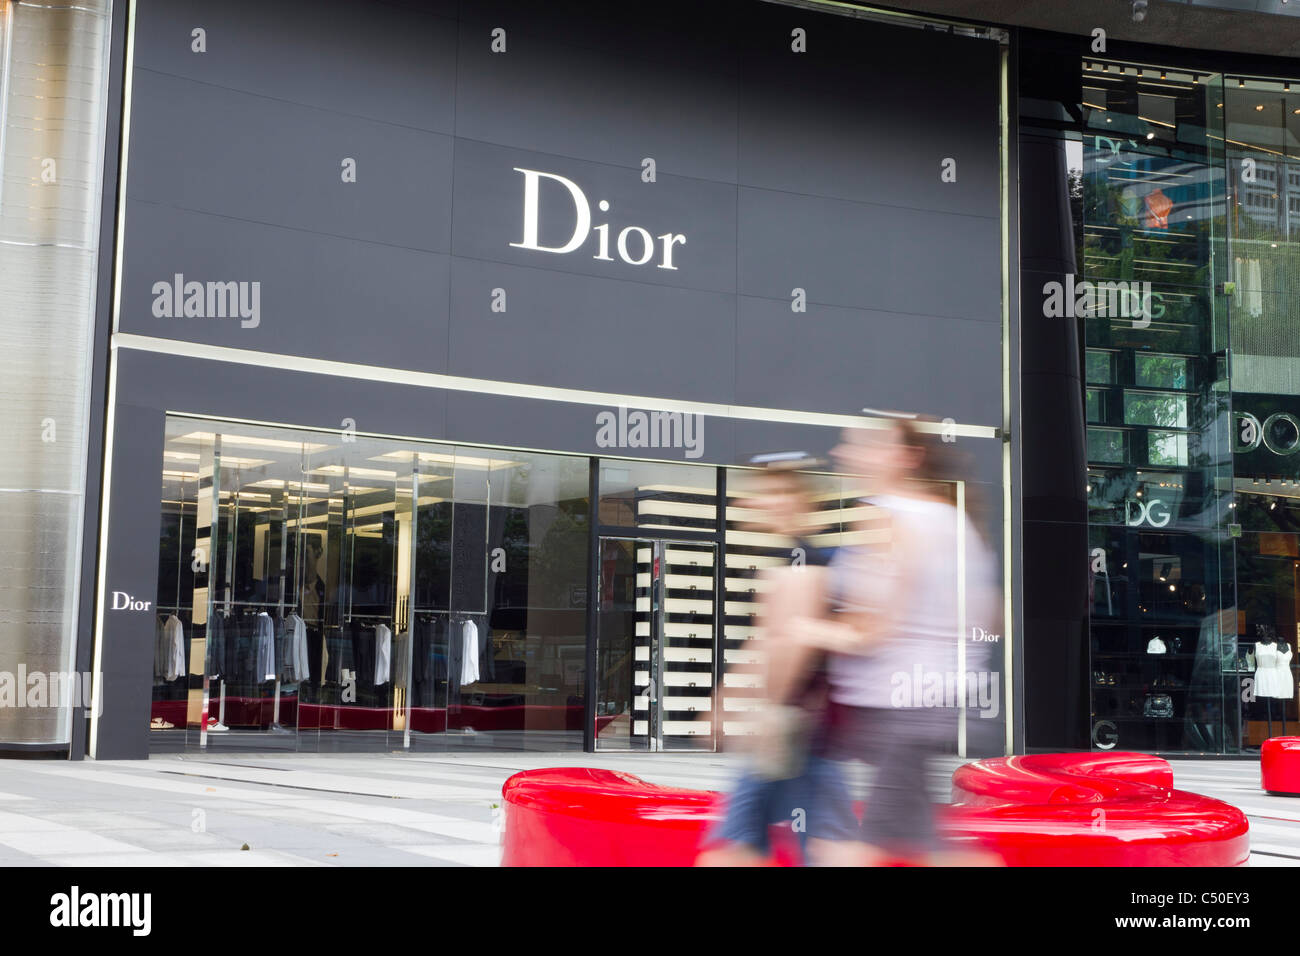 Dior shop in Singapore's ION Shopping Centre Stock Photo - Alamy